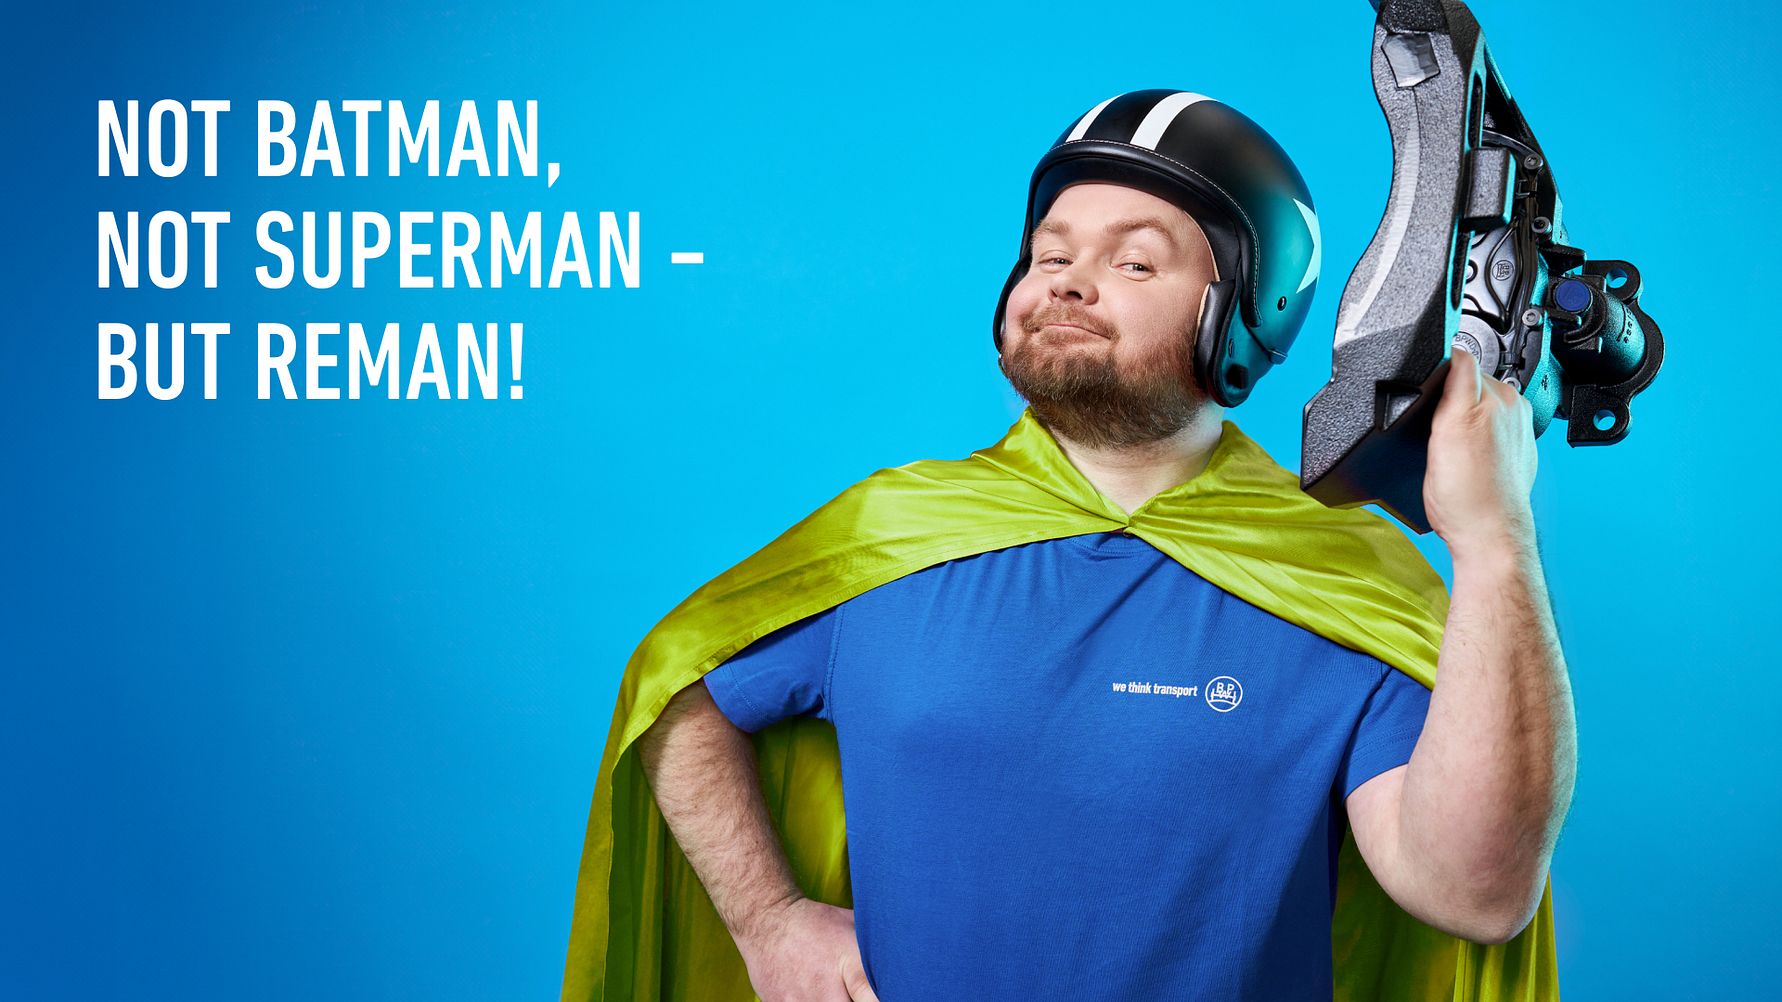 Batman? Superman? Reman! BPW promotes its new spare parts product line with playful humor.